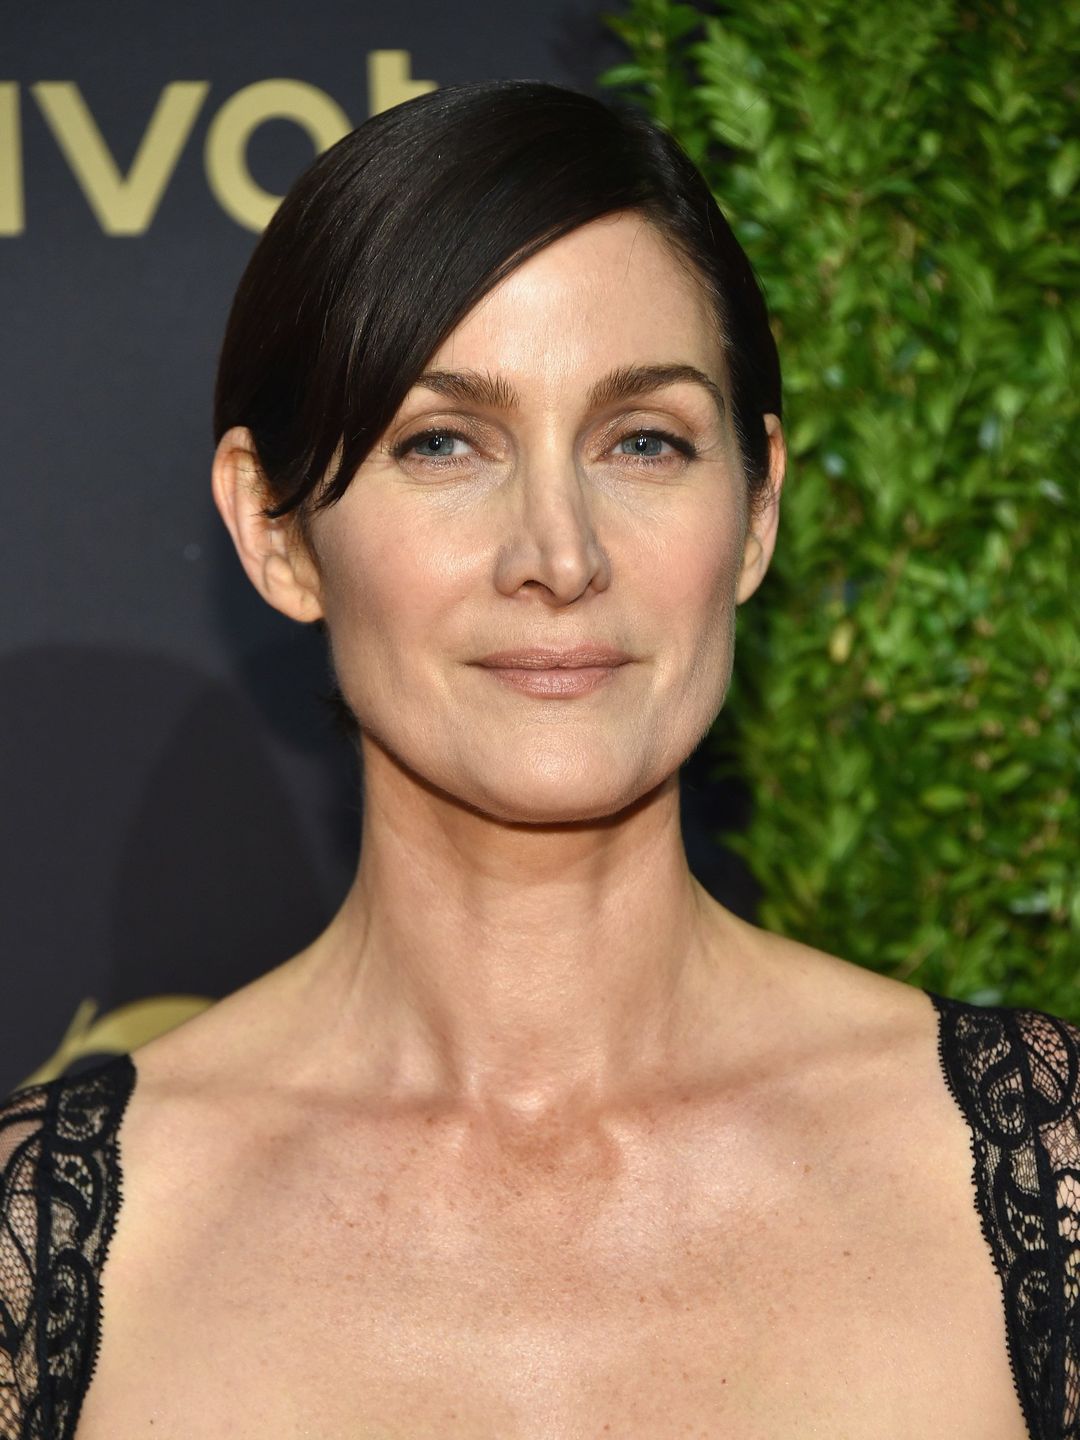 Carrie-Anne Moss who is she